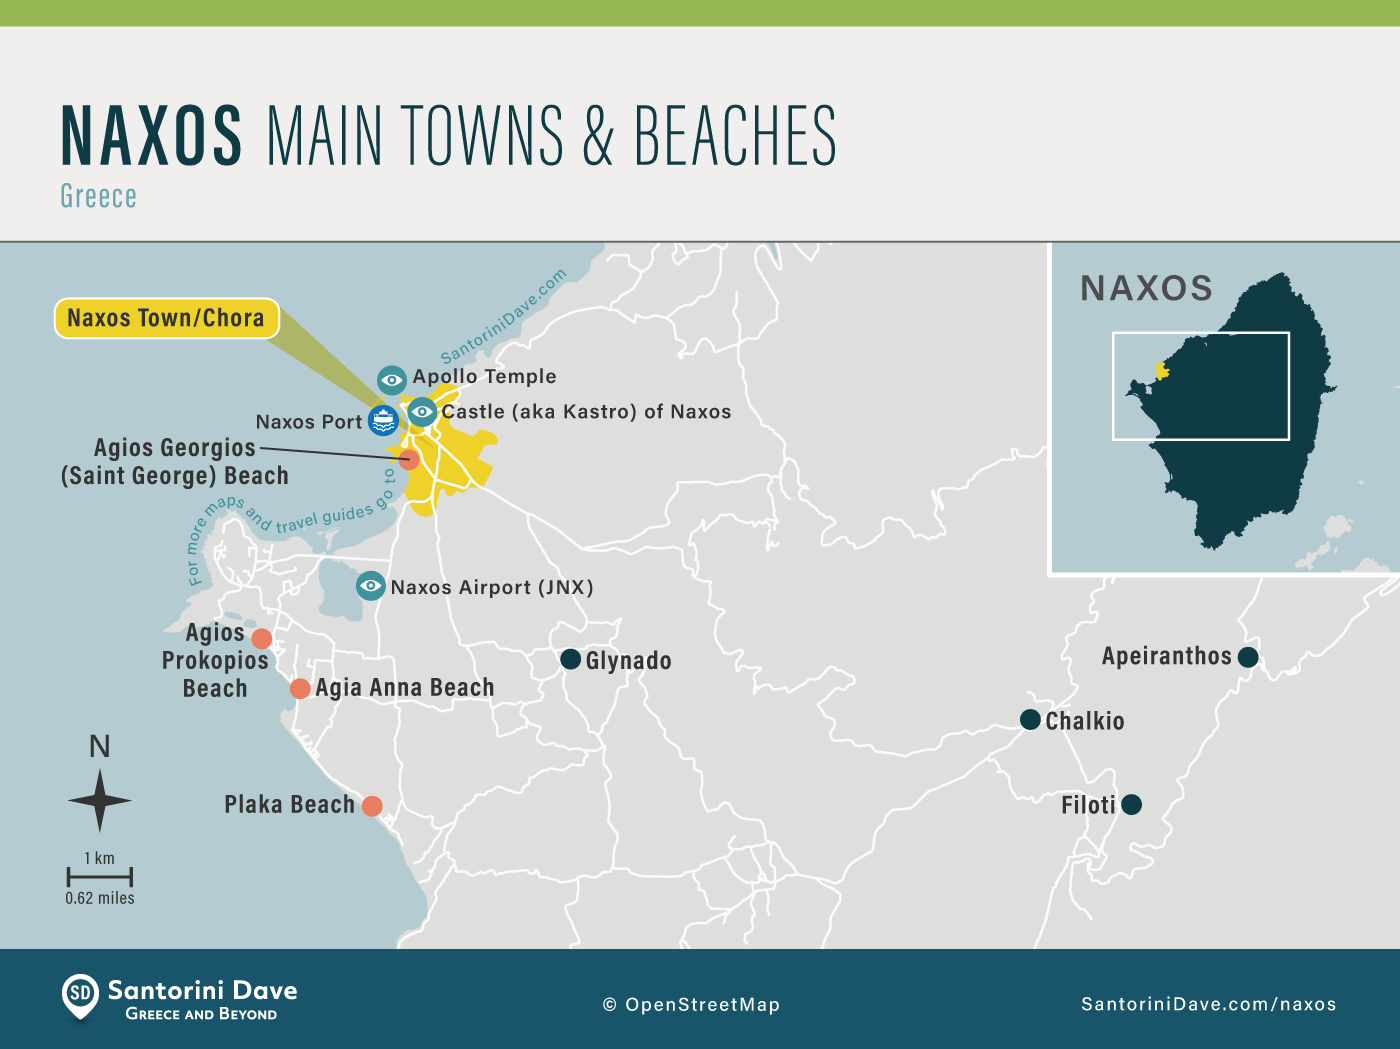 Map showing the main towns and beaches in the island of Naxos in Greece